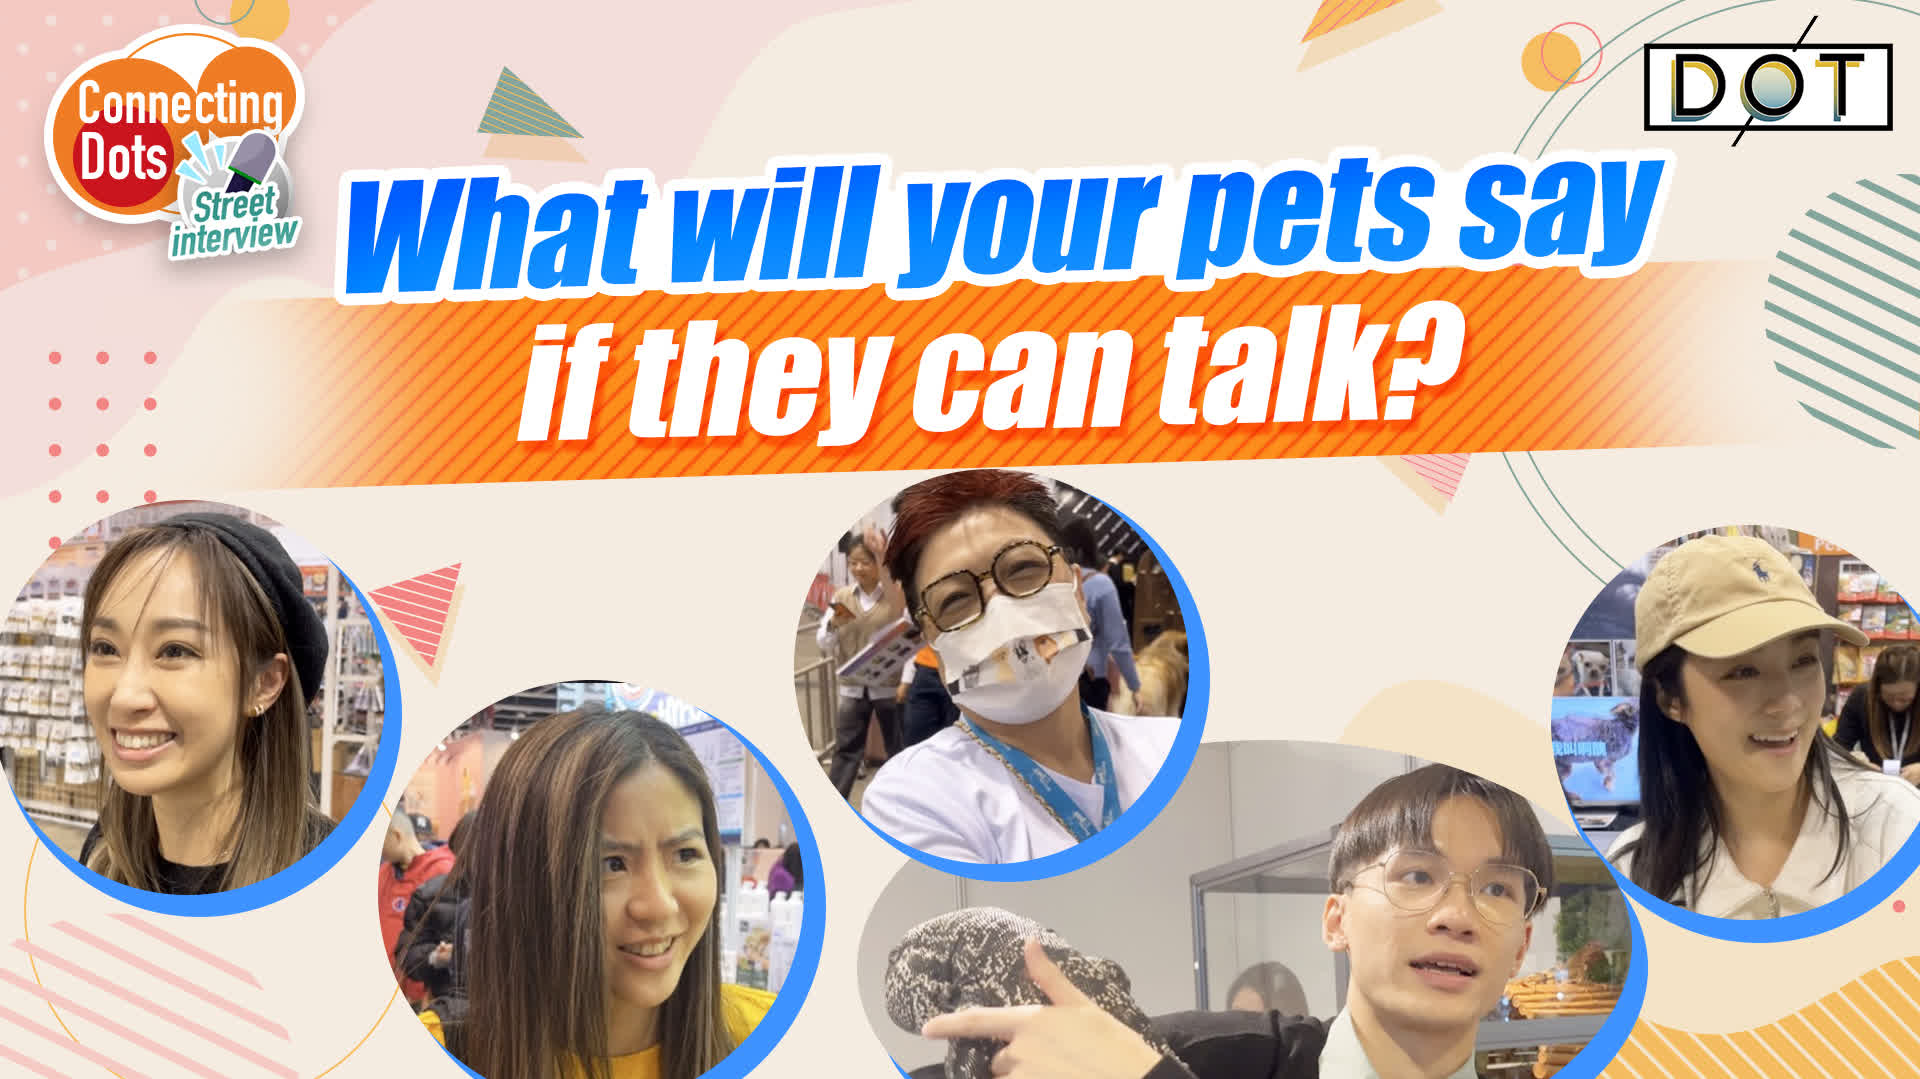 Connecting Dots | What will your pets say if they can talk?